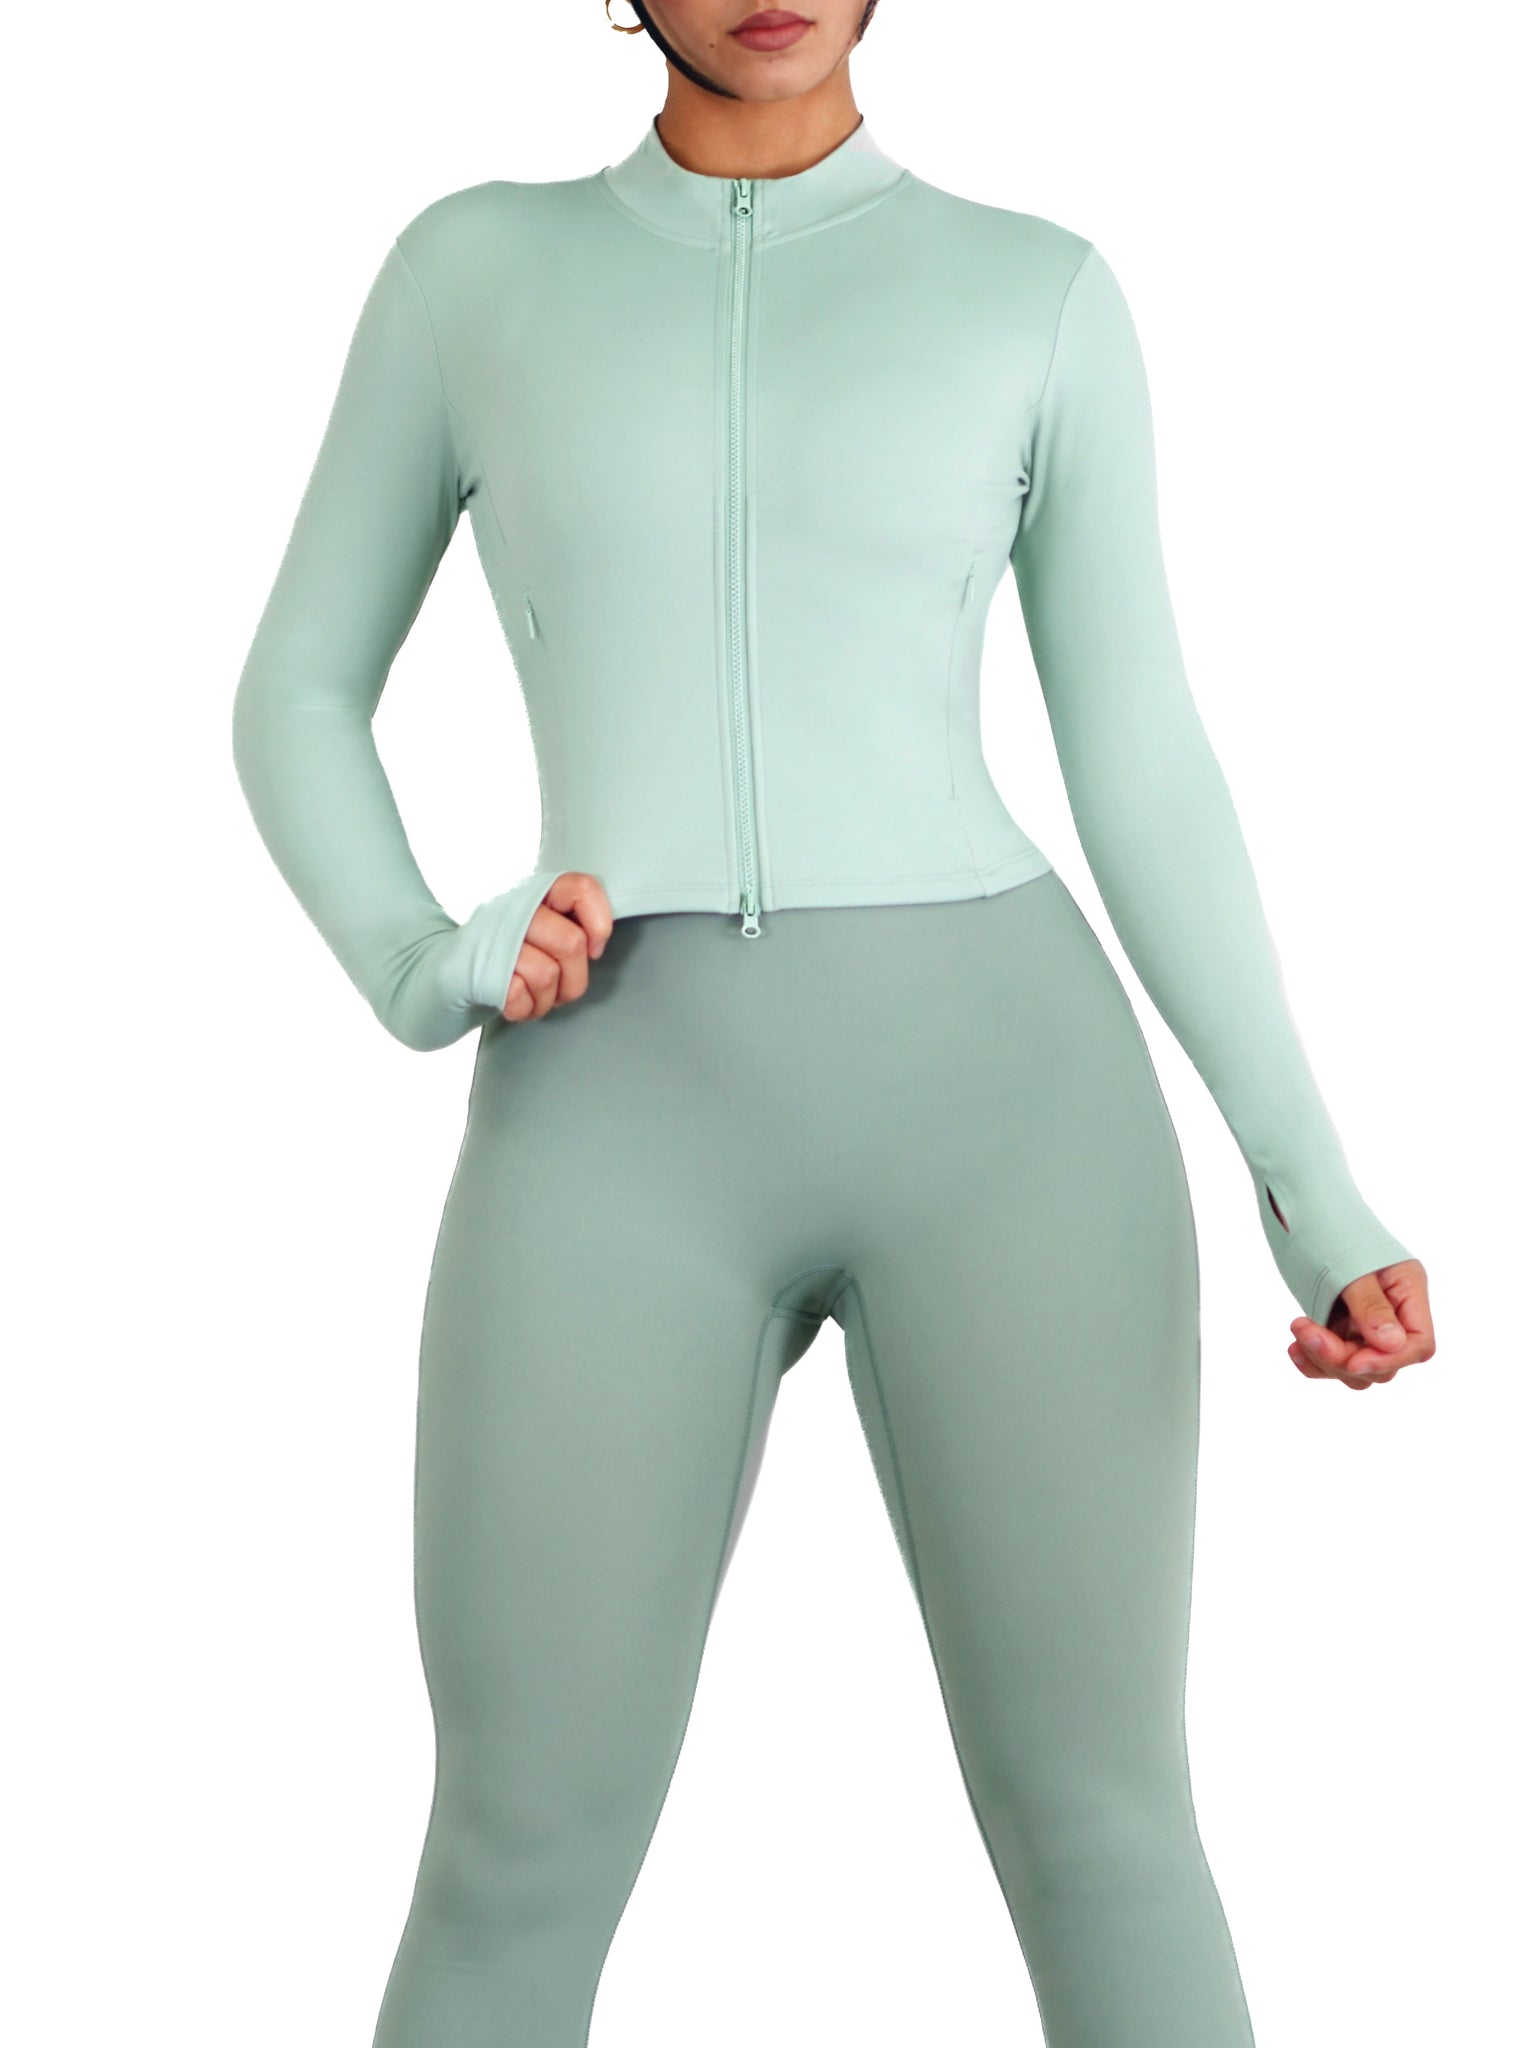 Fitted BBL Compression Jacket (Mint Eucalyptus) – Fitness Fashioness